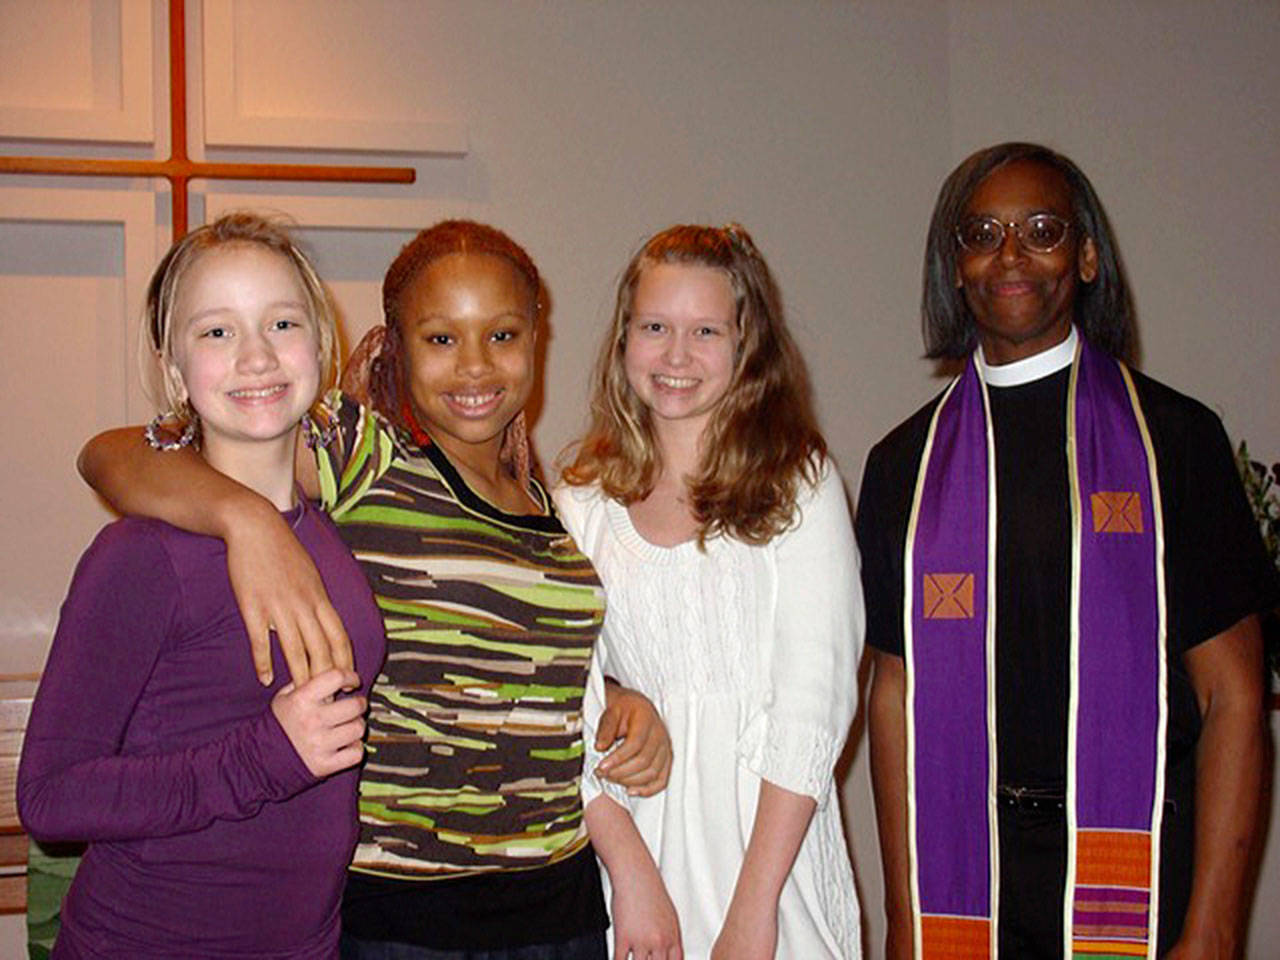 Attending a previous Martin Luther King Jr. “Blessed are the Peacemakers” event is Haley McConnaughey (left), Melissa Smith, Hannah McConnaughey and the Rev. Carla Robinson, who will be speaking Sunday at St. Augustine’s Episcopal Peace Fellowship event. (Photo provided)